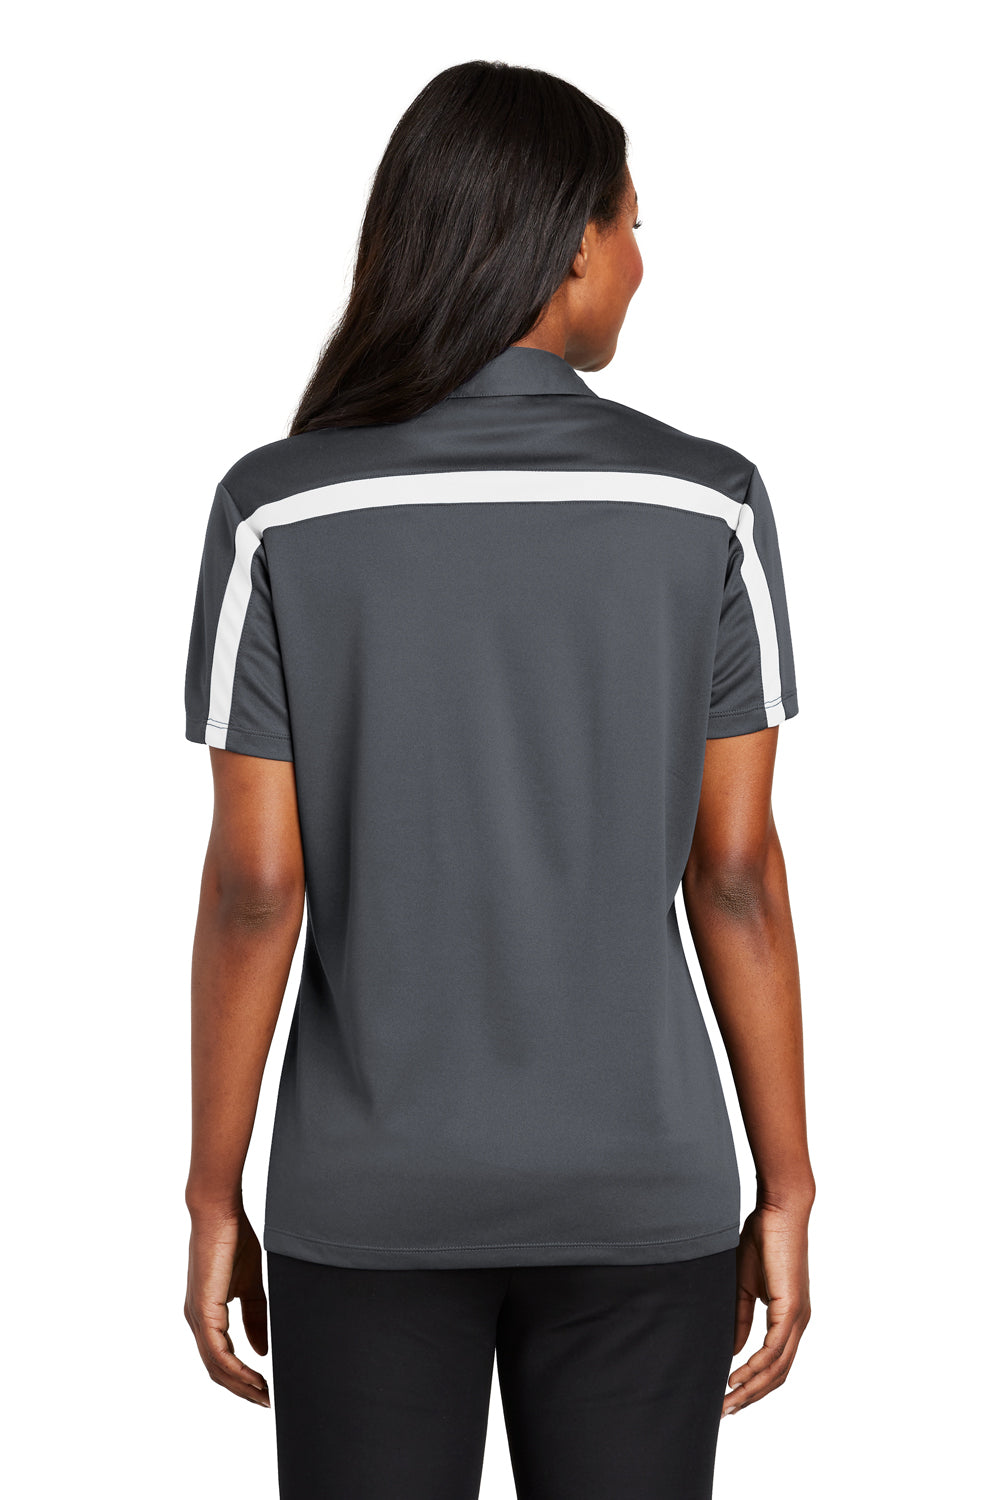 Port Authority L547 Womens Silk Touch Performance Moisture Wicking Short Sleeve Polo Shirt Steel Grey/White Back